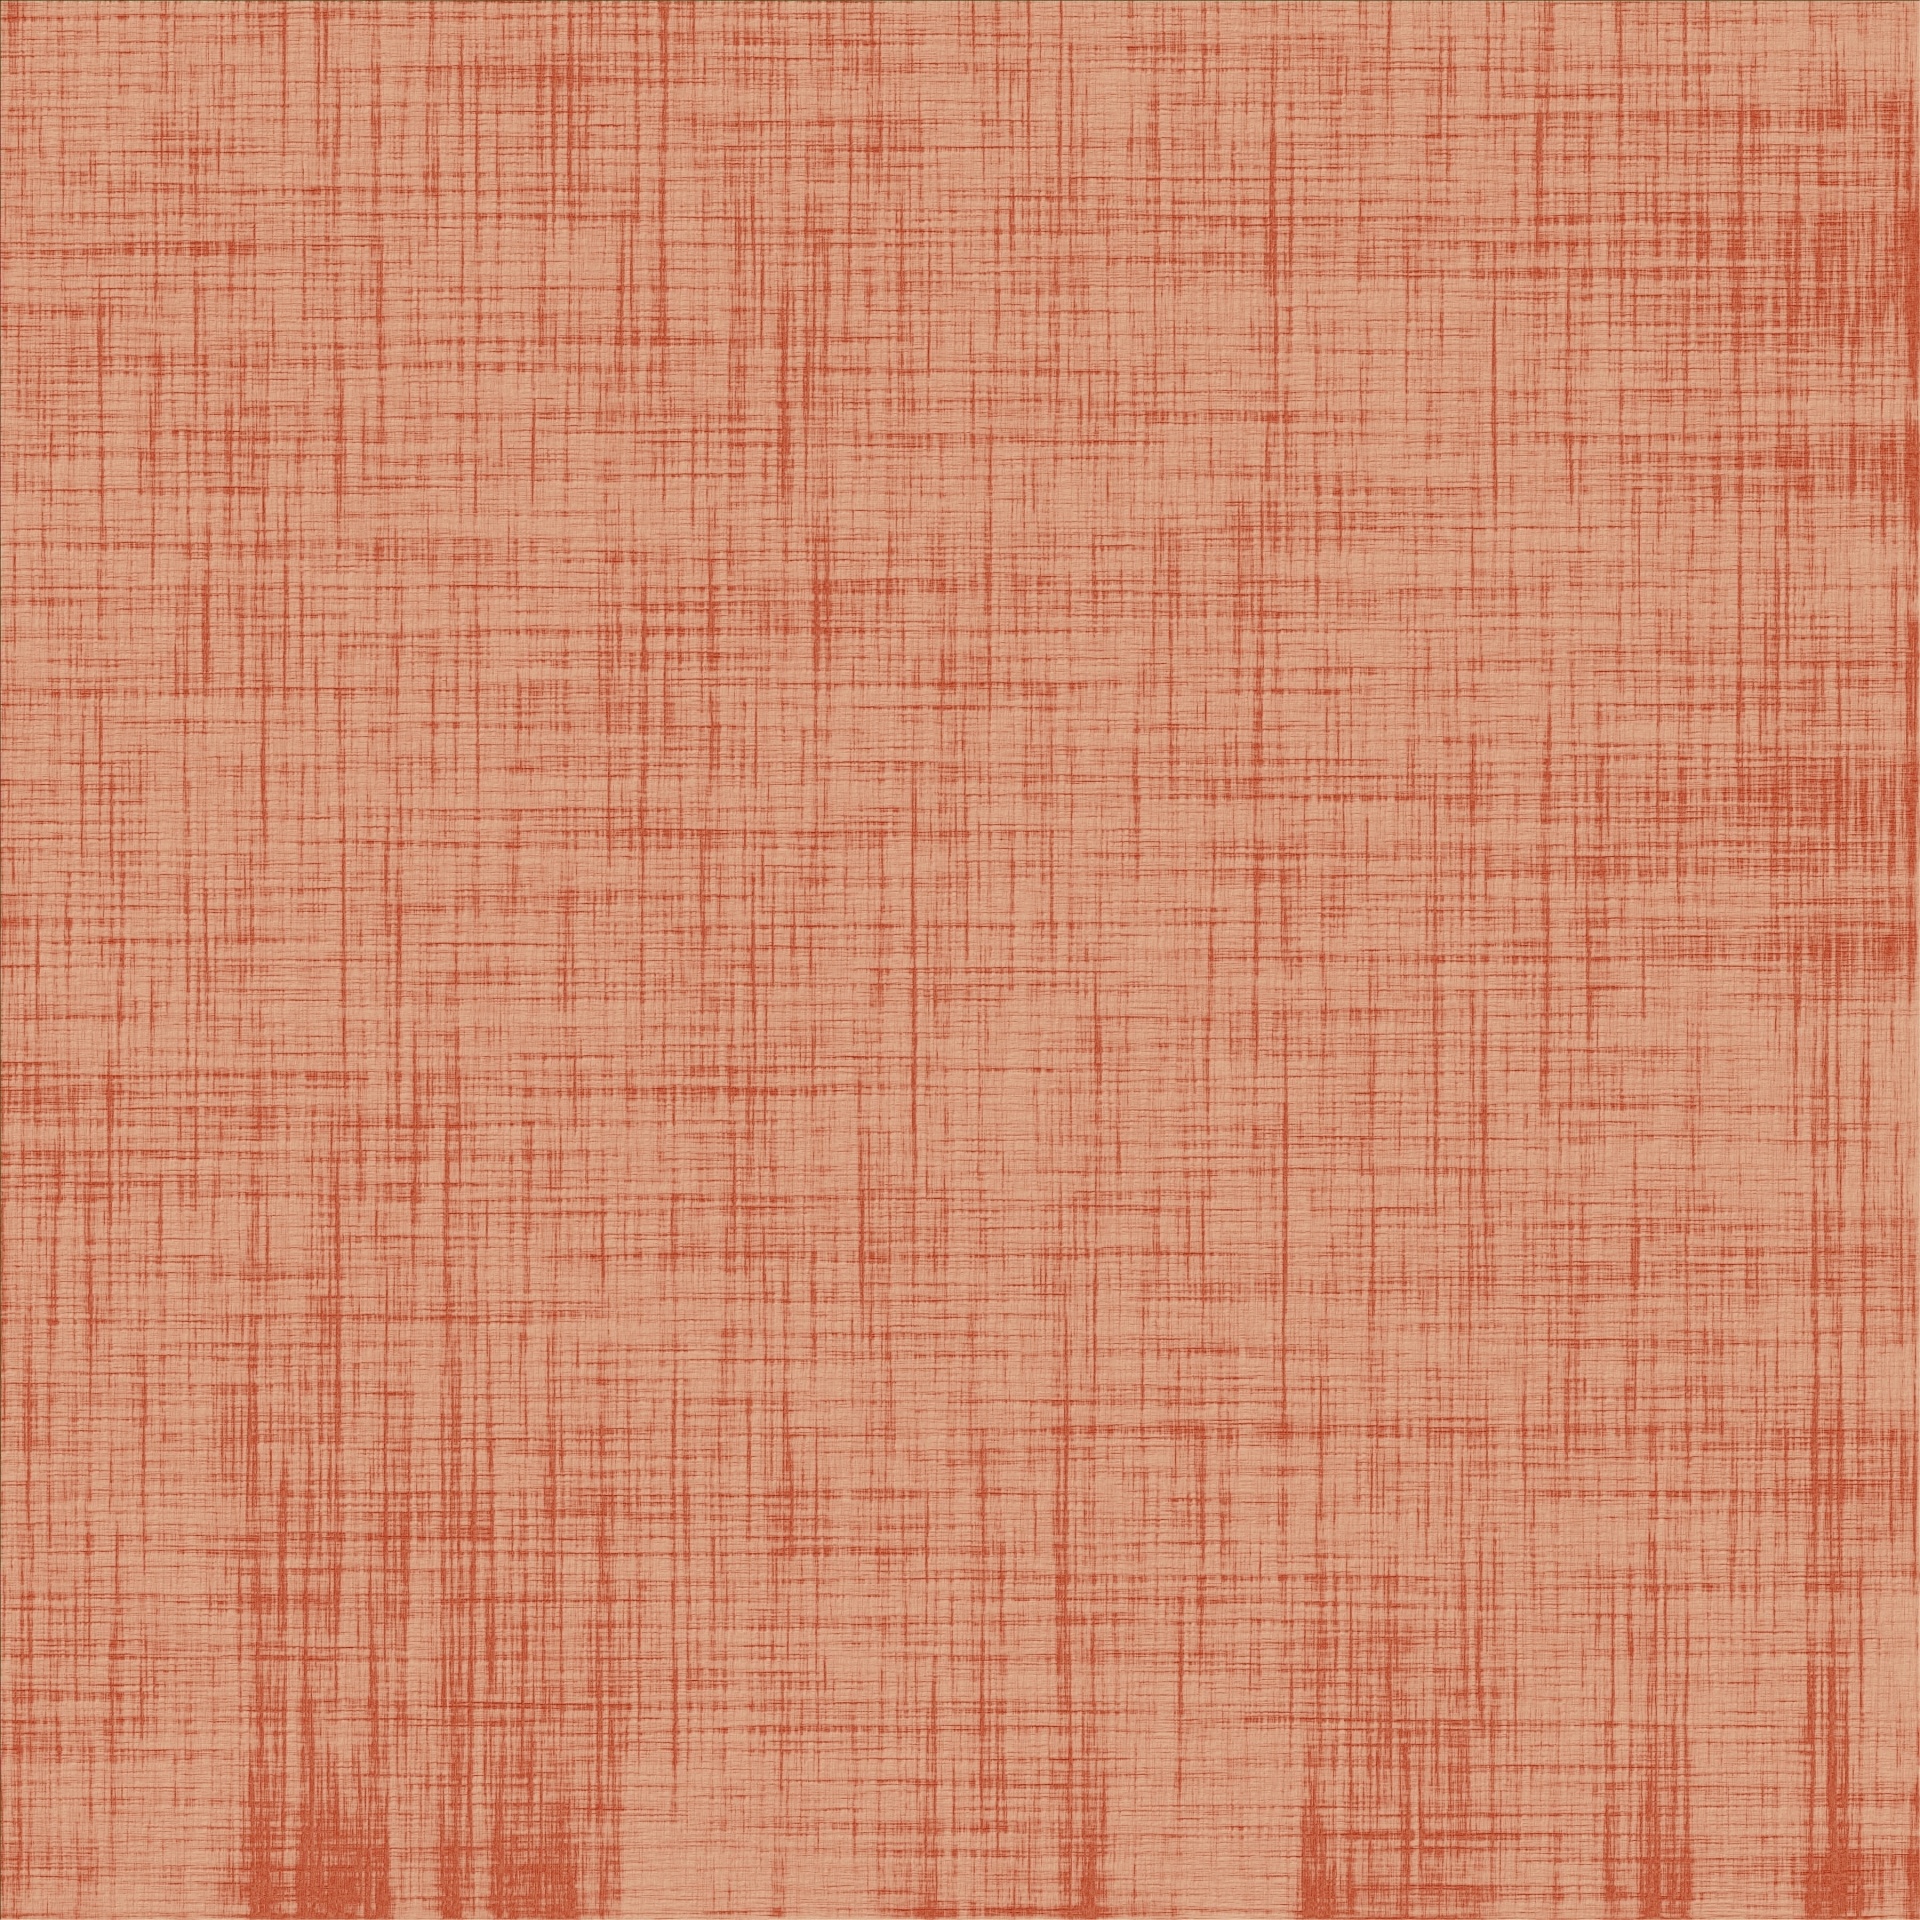 Texture Paper Background Free Stock Photo - Public Domain Pictures